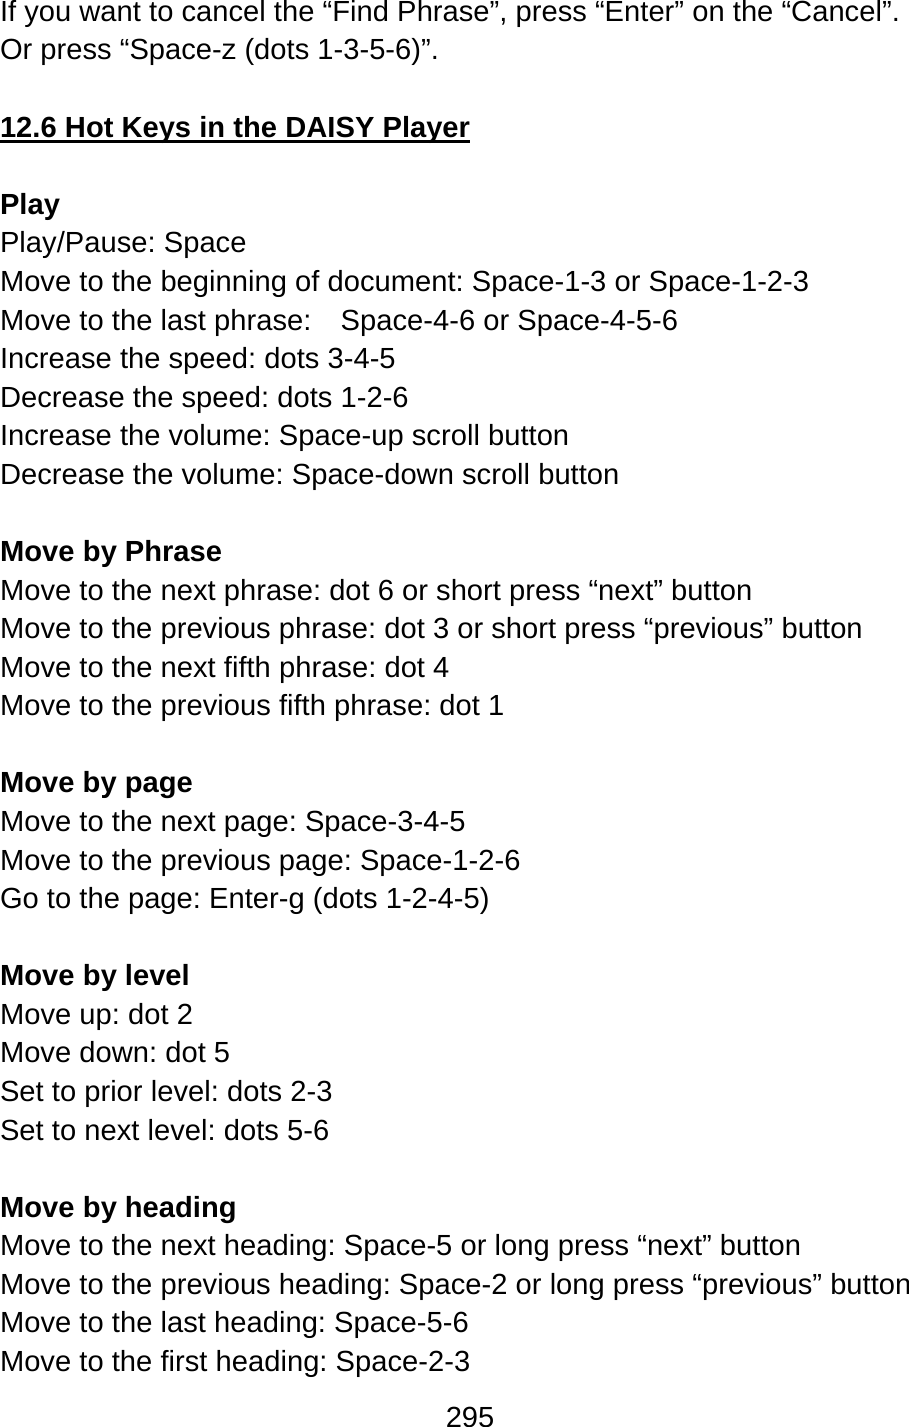 295  If you want to cancel the “Find Phrase”, press “Enter” on the “Cancel”. Or press “Space-z (dots 1-3-5-6)”.  12.6 Hot Keys in the DAISY Player  Play  Play/Pause: Space Move to the beginning of document: Space-1-3 or Space-1-2-3 Move to the last phrase:  Space-4-6 or Space-4-5-6 Increase the speed: dots 3-4-5 Decrease the speed: dots 1-2-6 Increase the volume: Space-up scroll button Decrease the volume: Space-down scroll button  Move by Phrase Move to the next phrase: dot 6 or short press “next” button Move to the previous phrase: dot 3 or short press “previous” button Move to the next fifth phrase: dot 4 Move to the previous fifth phrase: dot 1  Move by page Move to the next page: Space-3-4-5 Move to the previous page: Space-1-2-6 Go to the page: Enter-g (dots 1-2-4-5)  Move by level Move up: dot 2 Move down: dot 5 Set to prior level: dots 2-3 Set to next level: dots 5-6  Move by heading Move to the next heading: Space-5 or long press “next” button Move to the previous heading: Space-2 or long press “previous” button Move to the last heading: Space-5-6 Move to the first heading: Space-2-3 